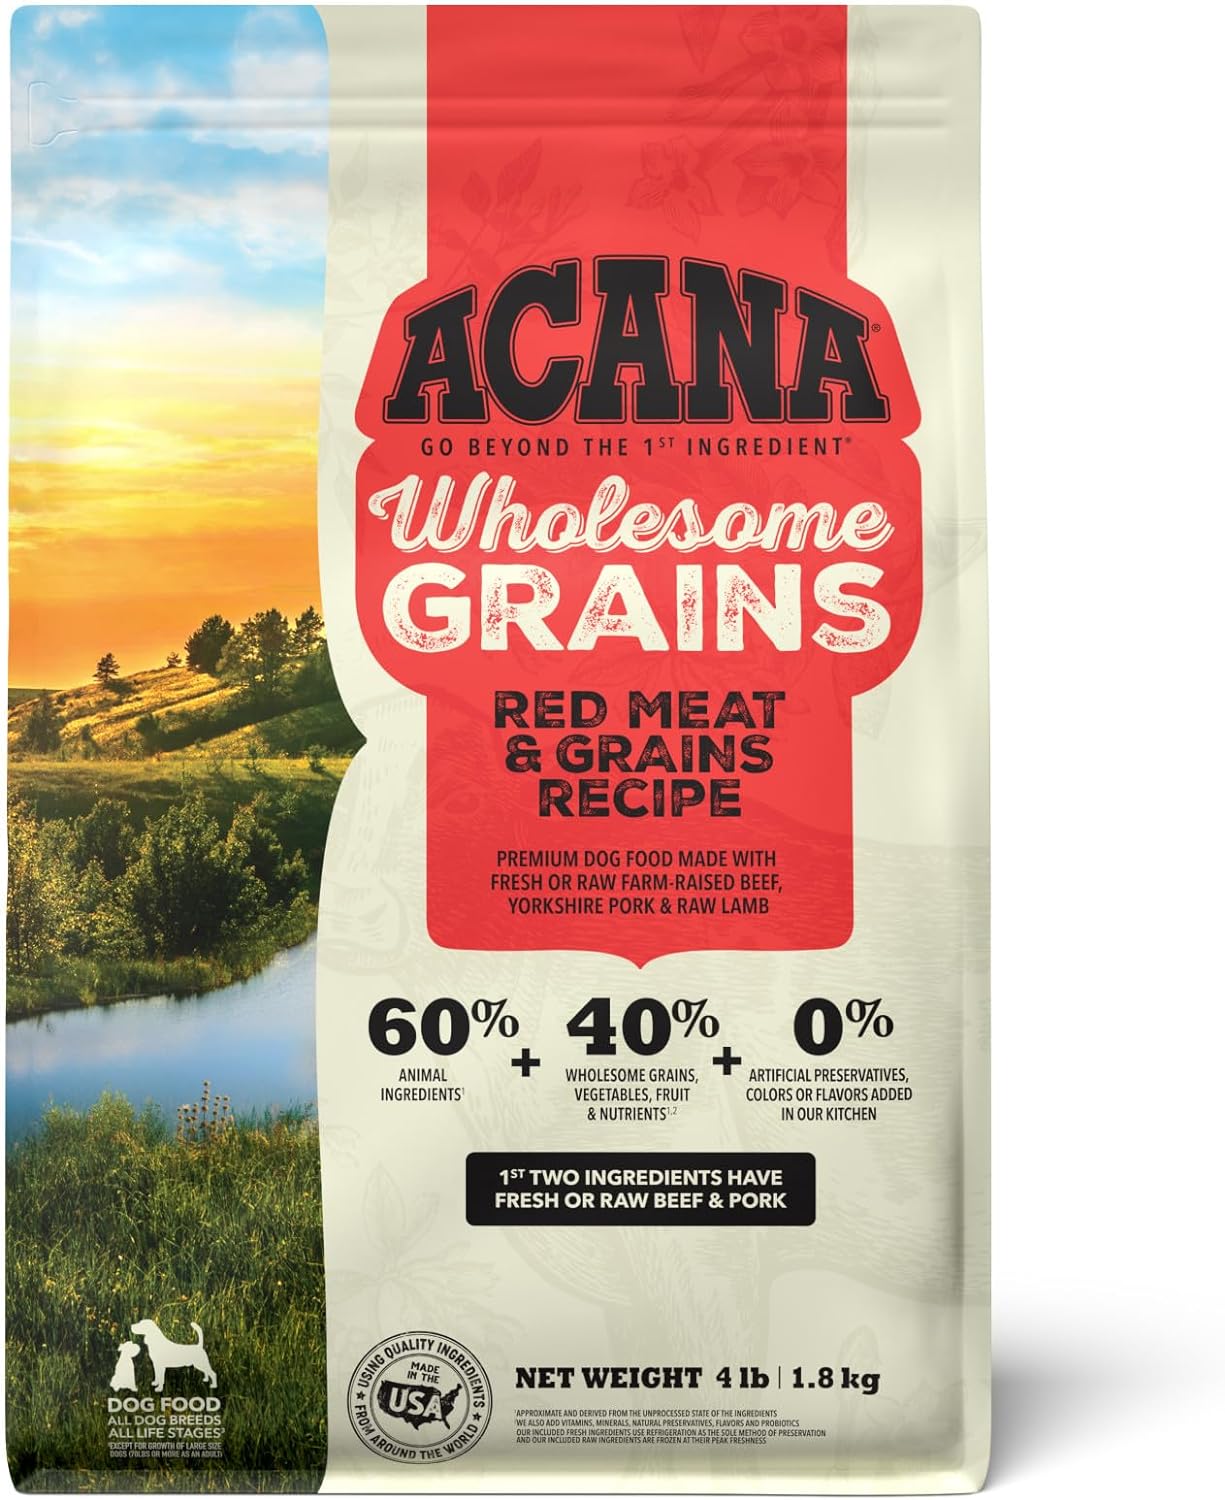 ACANA Wholesome Grains Dry Dog Food, Red Meat and Grains, Gluten Free, Beef, Pork, and Lamb Recipe, 4lb